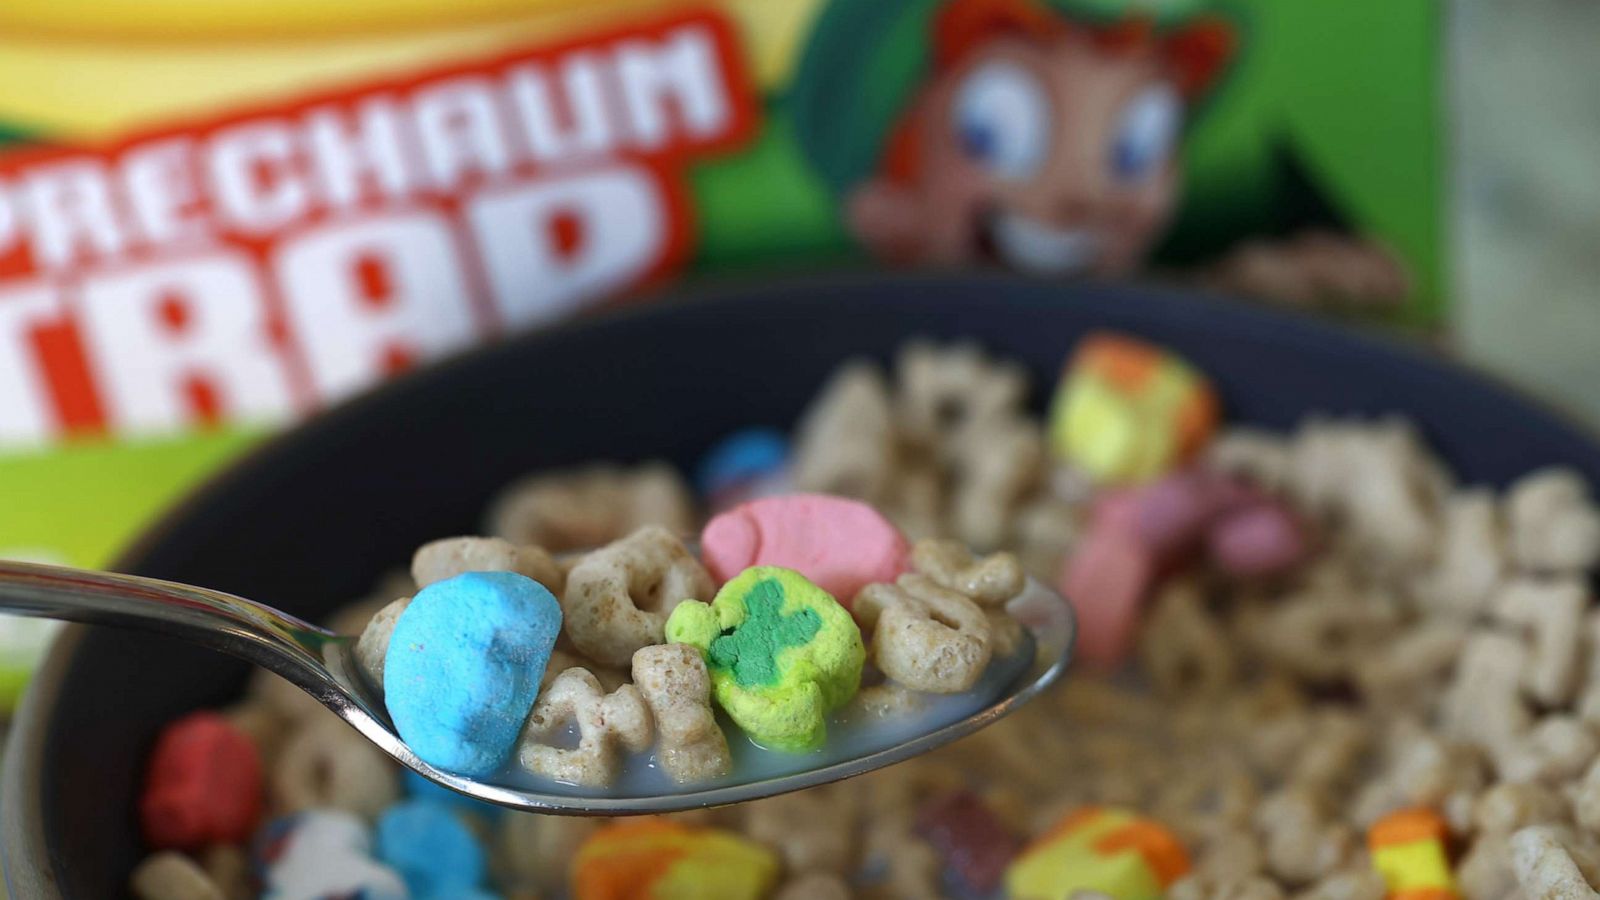 FDA Investigating Lucky Charms After Reports of Illness